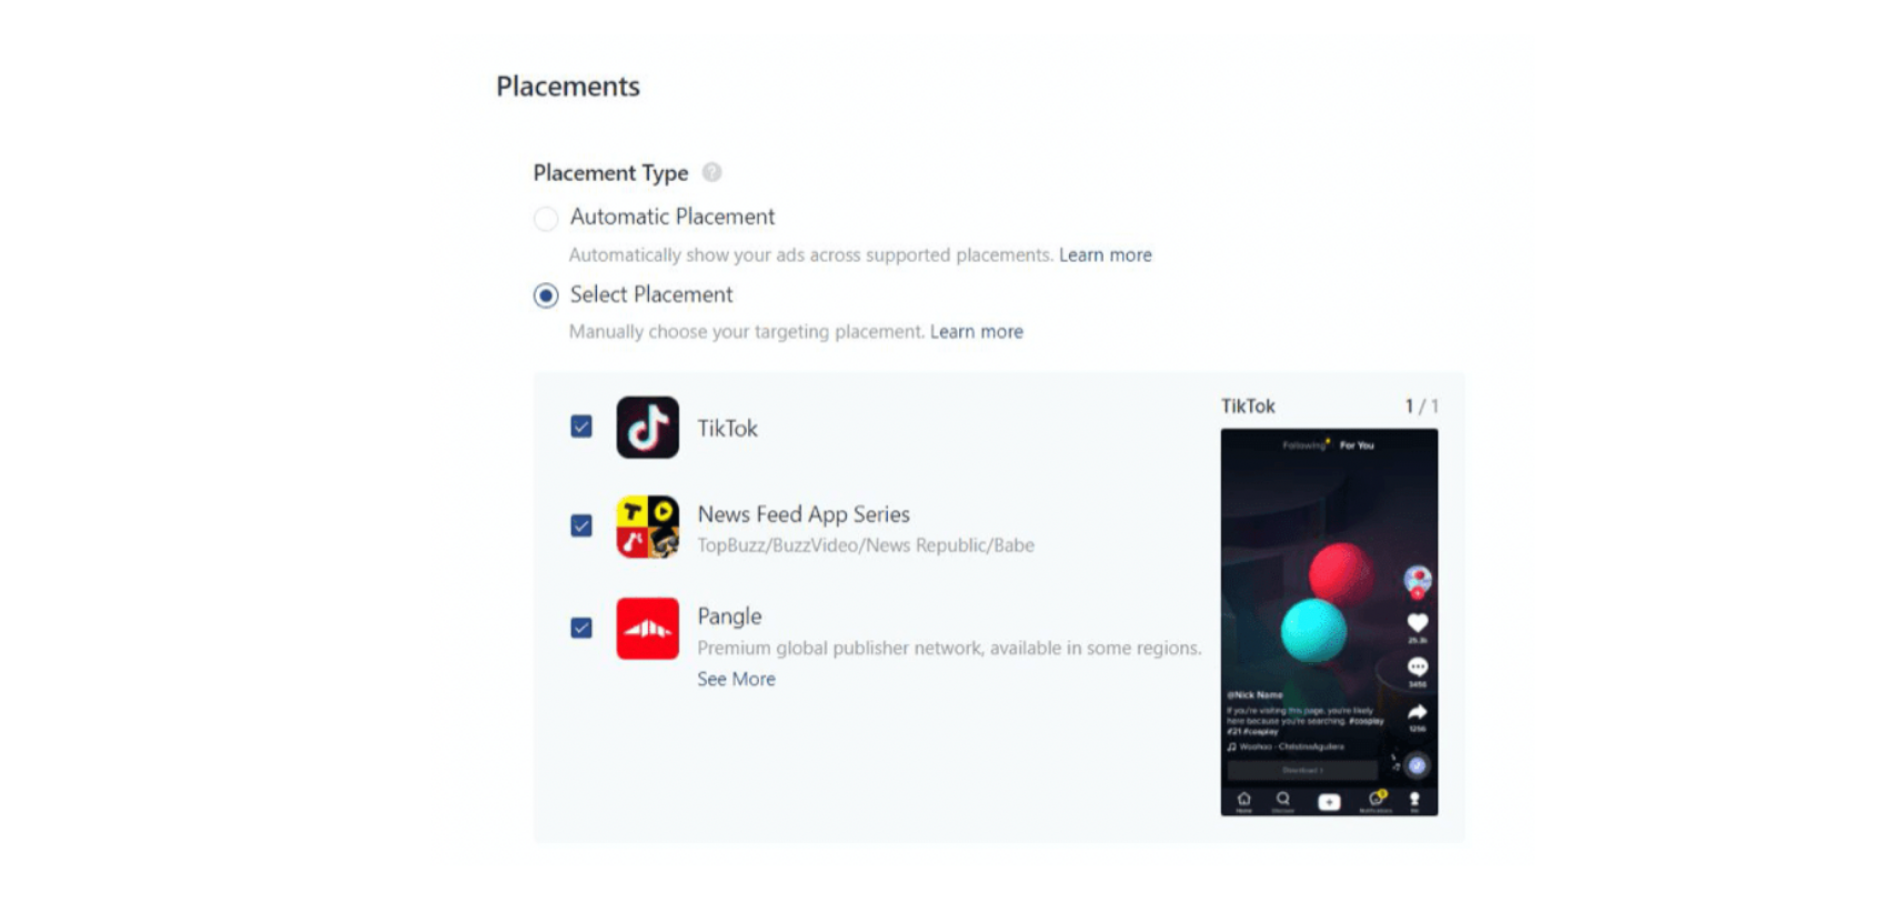 Here you can see how to set the different placements for your TikTok ads.